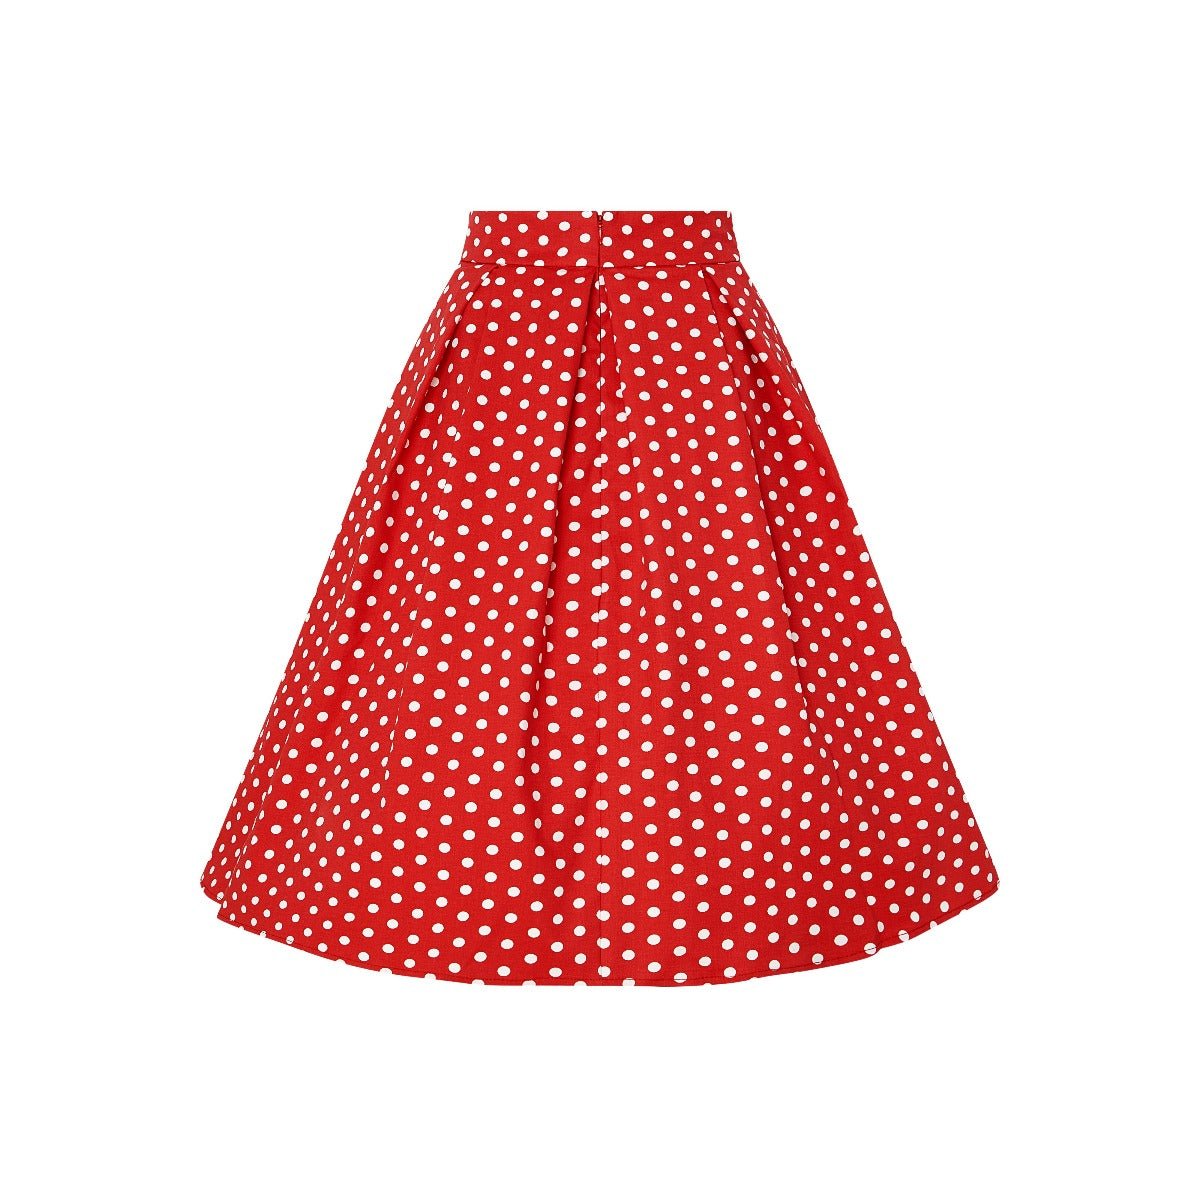 High waisted, flared skirt, in red polka dot print, back view